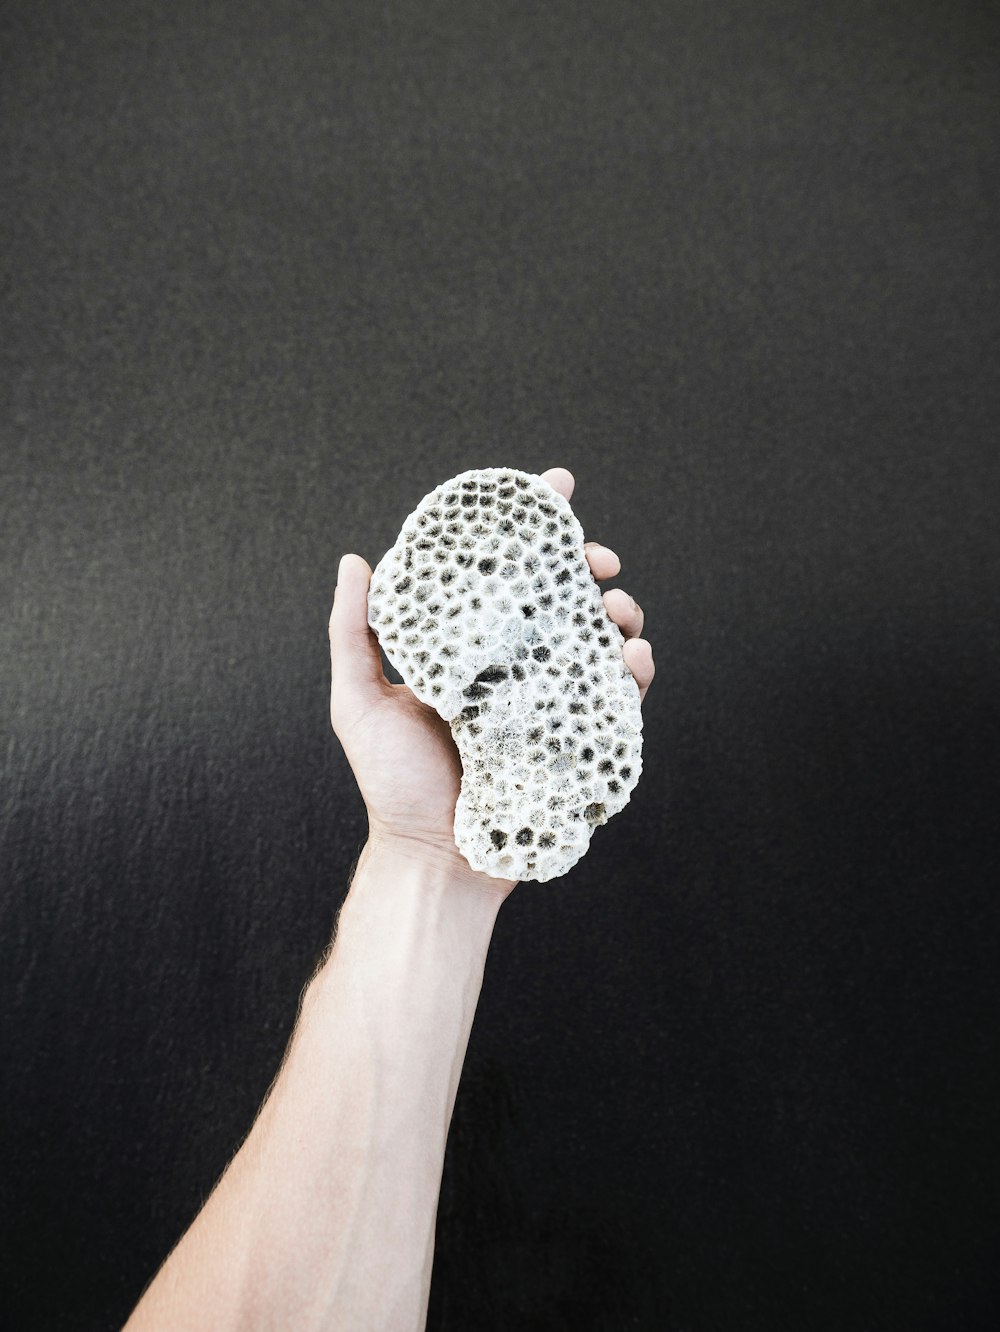 person's hand holding white stone